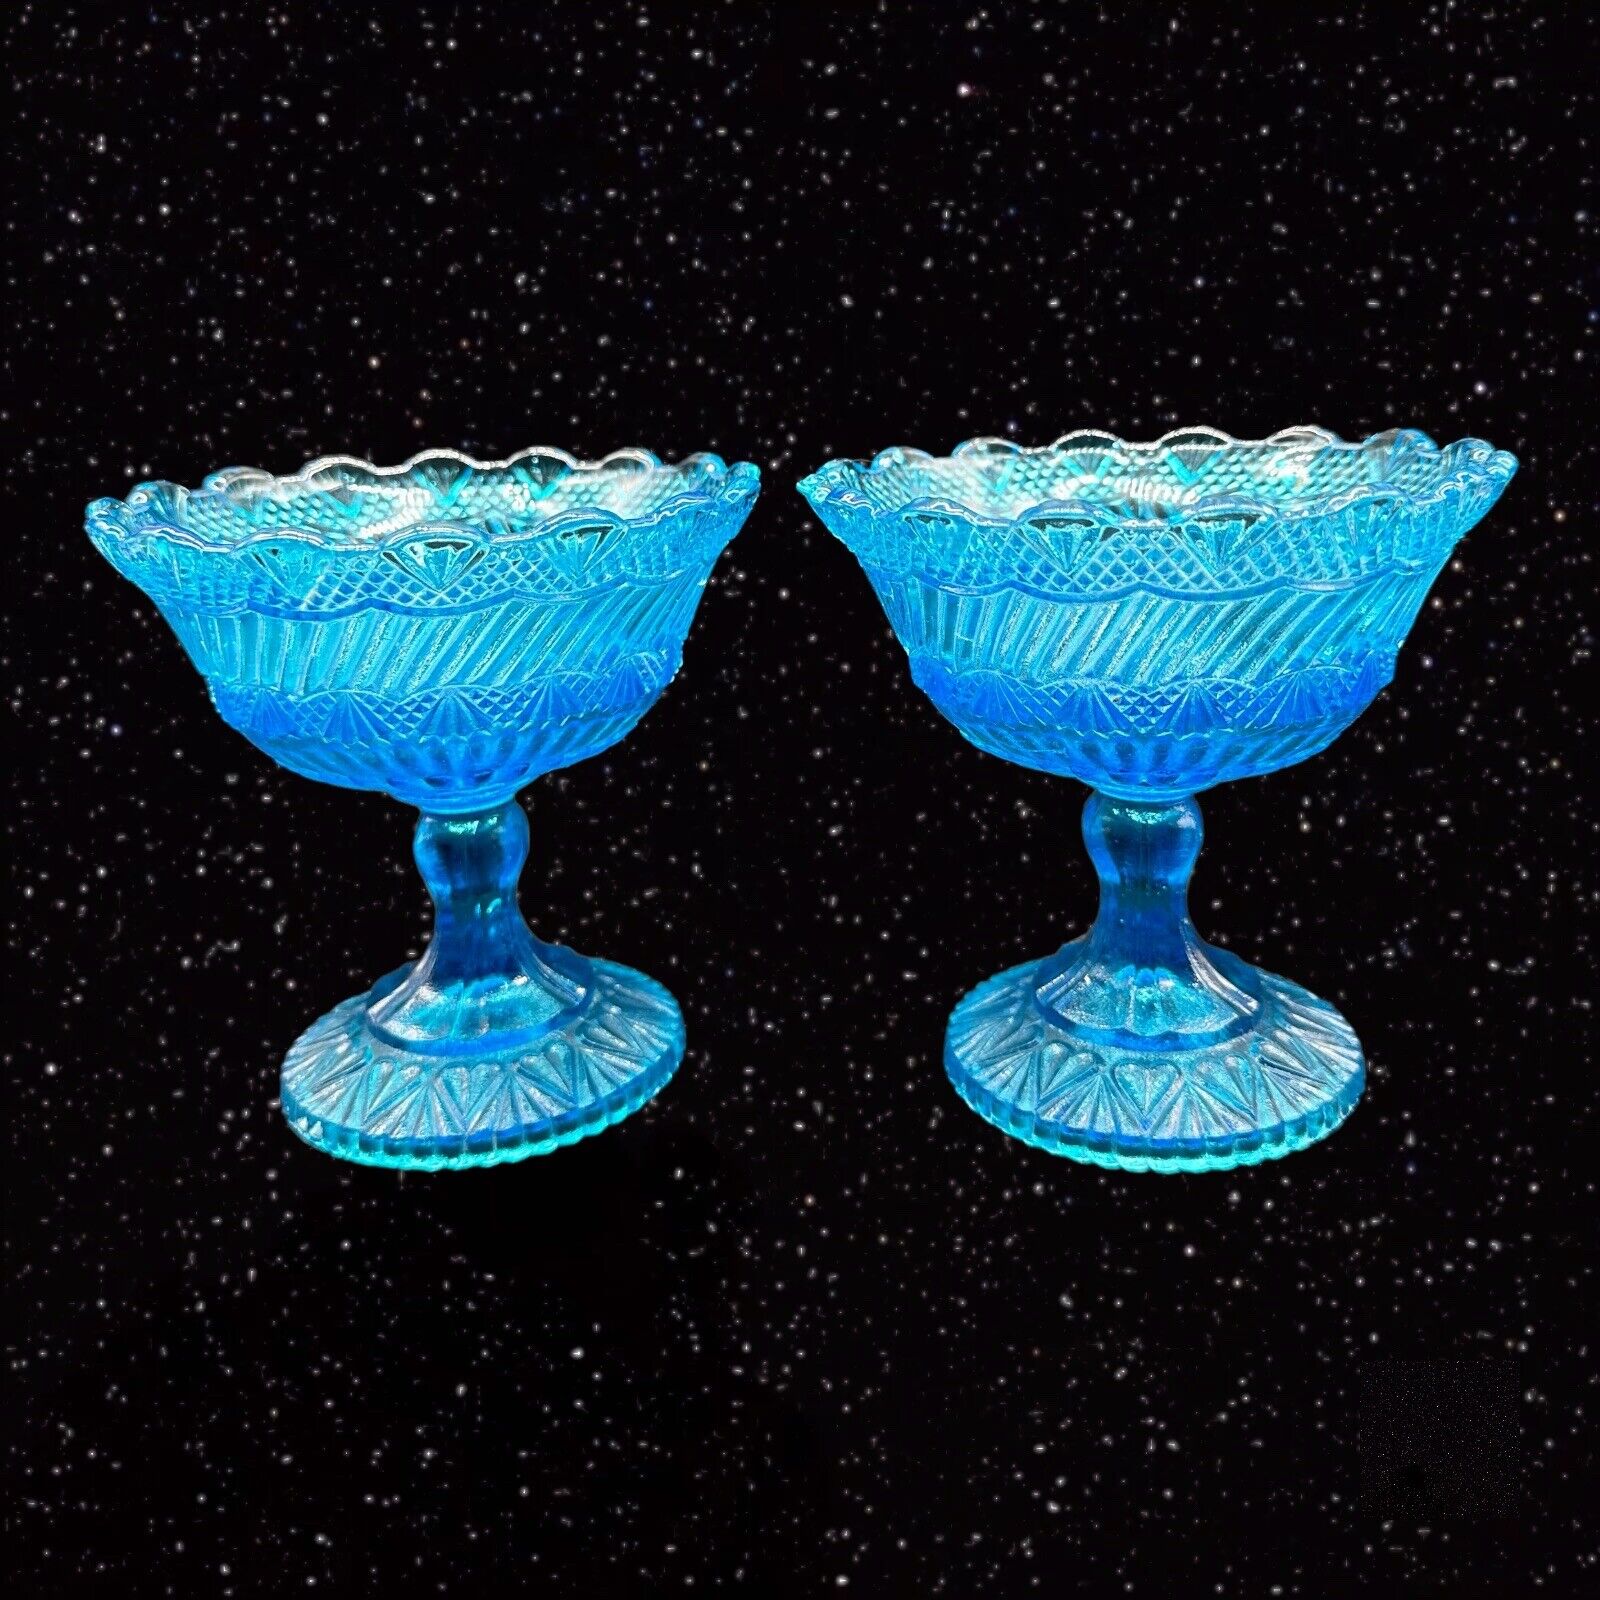 Vintage Blue Drinking Goblet Set 2 pcs Art Glass Compote Decorated 4.5”T 4.5”W